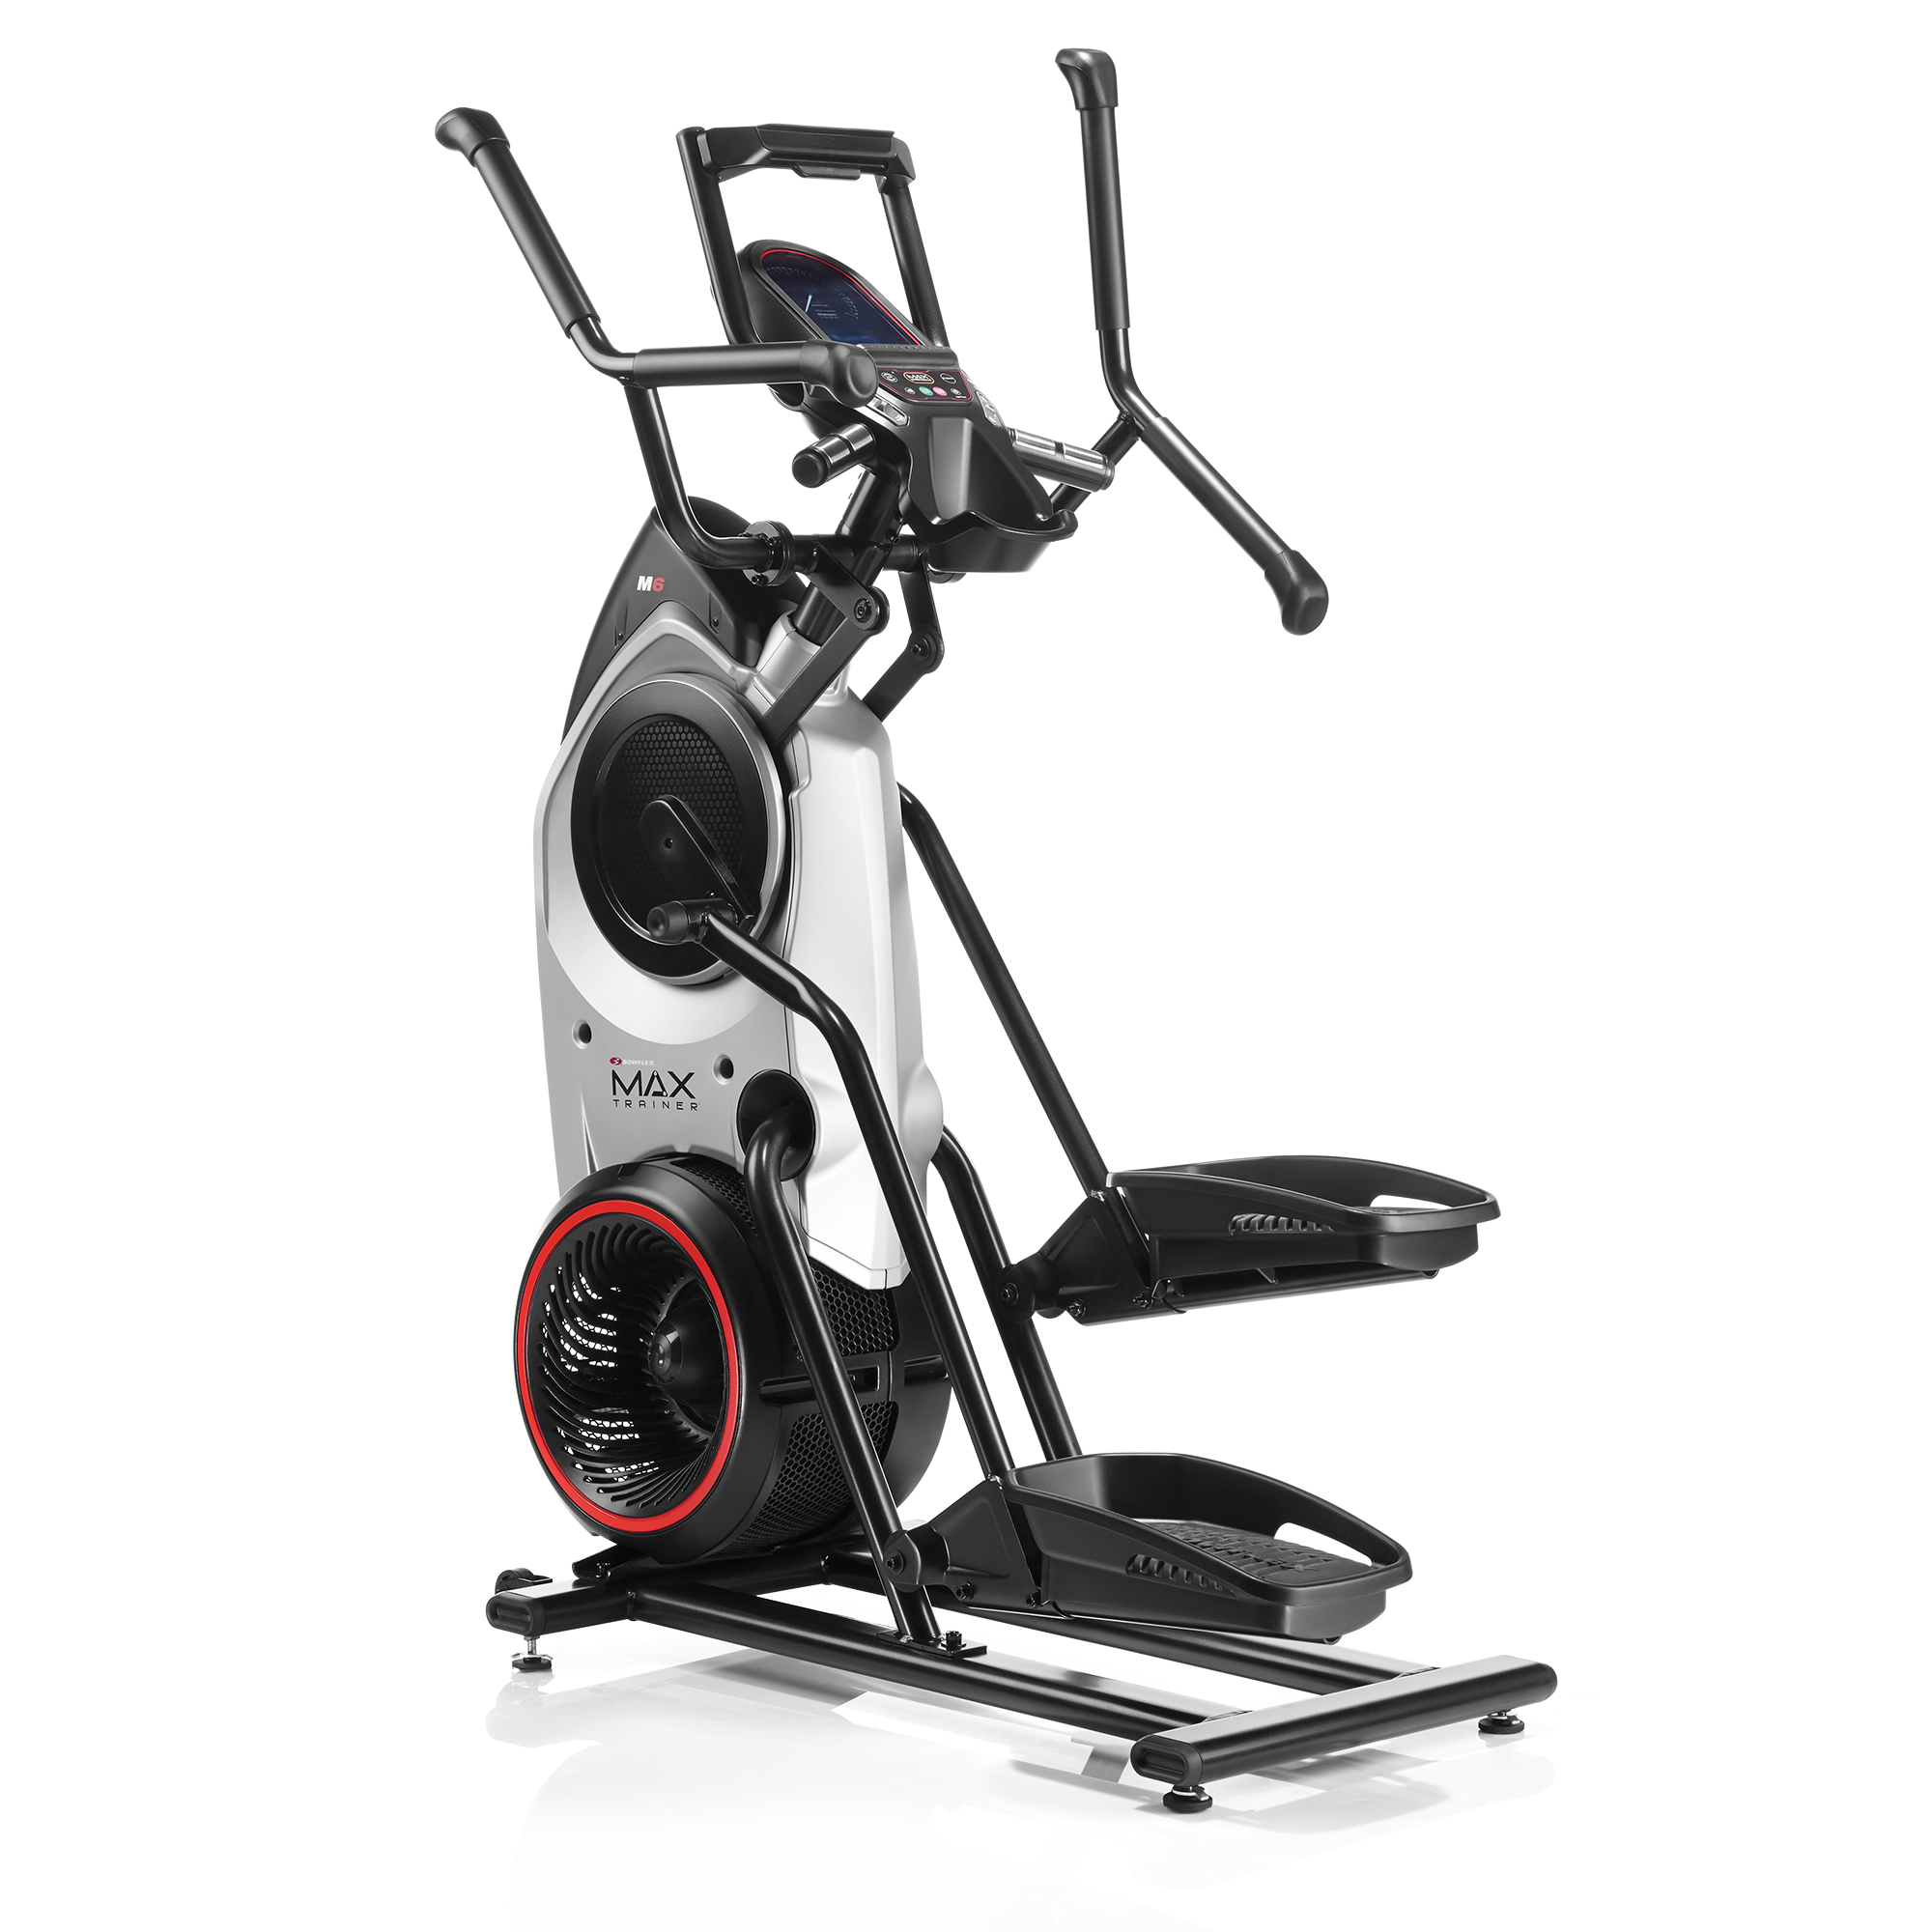 Max Trainer M6 - Max Workouts At An 